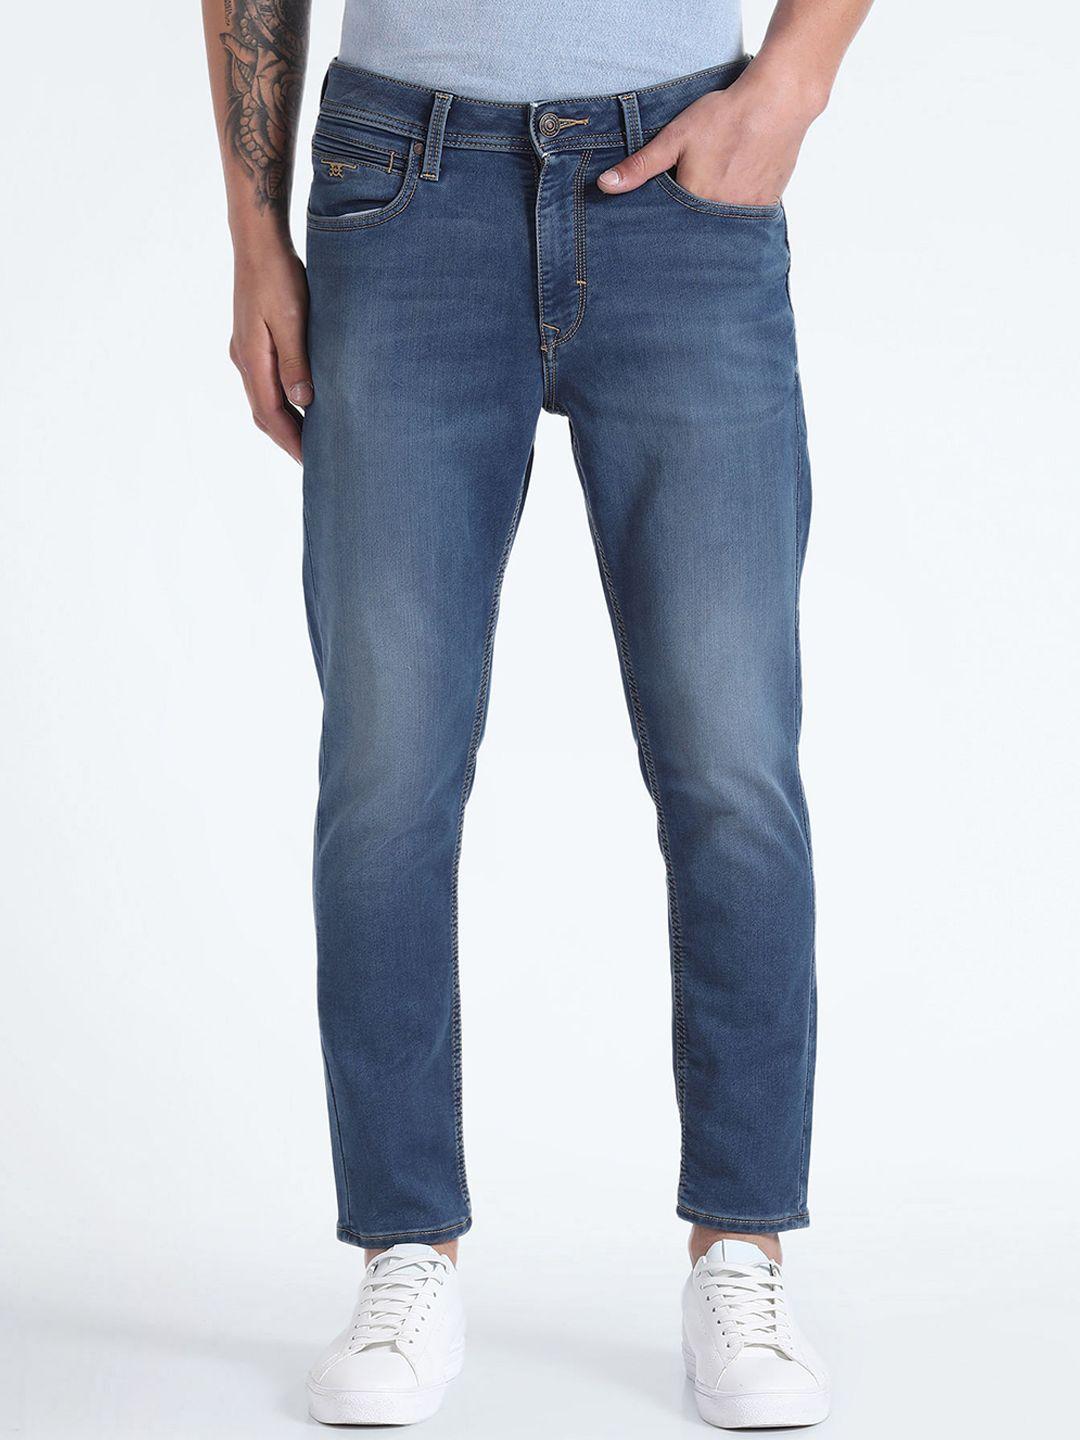 flying-machine-men-tapered-fit-high-rise-clean-look-heavy-fade-stretchable-jeans